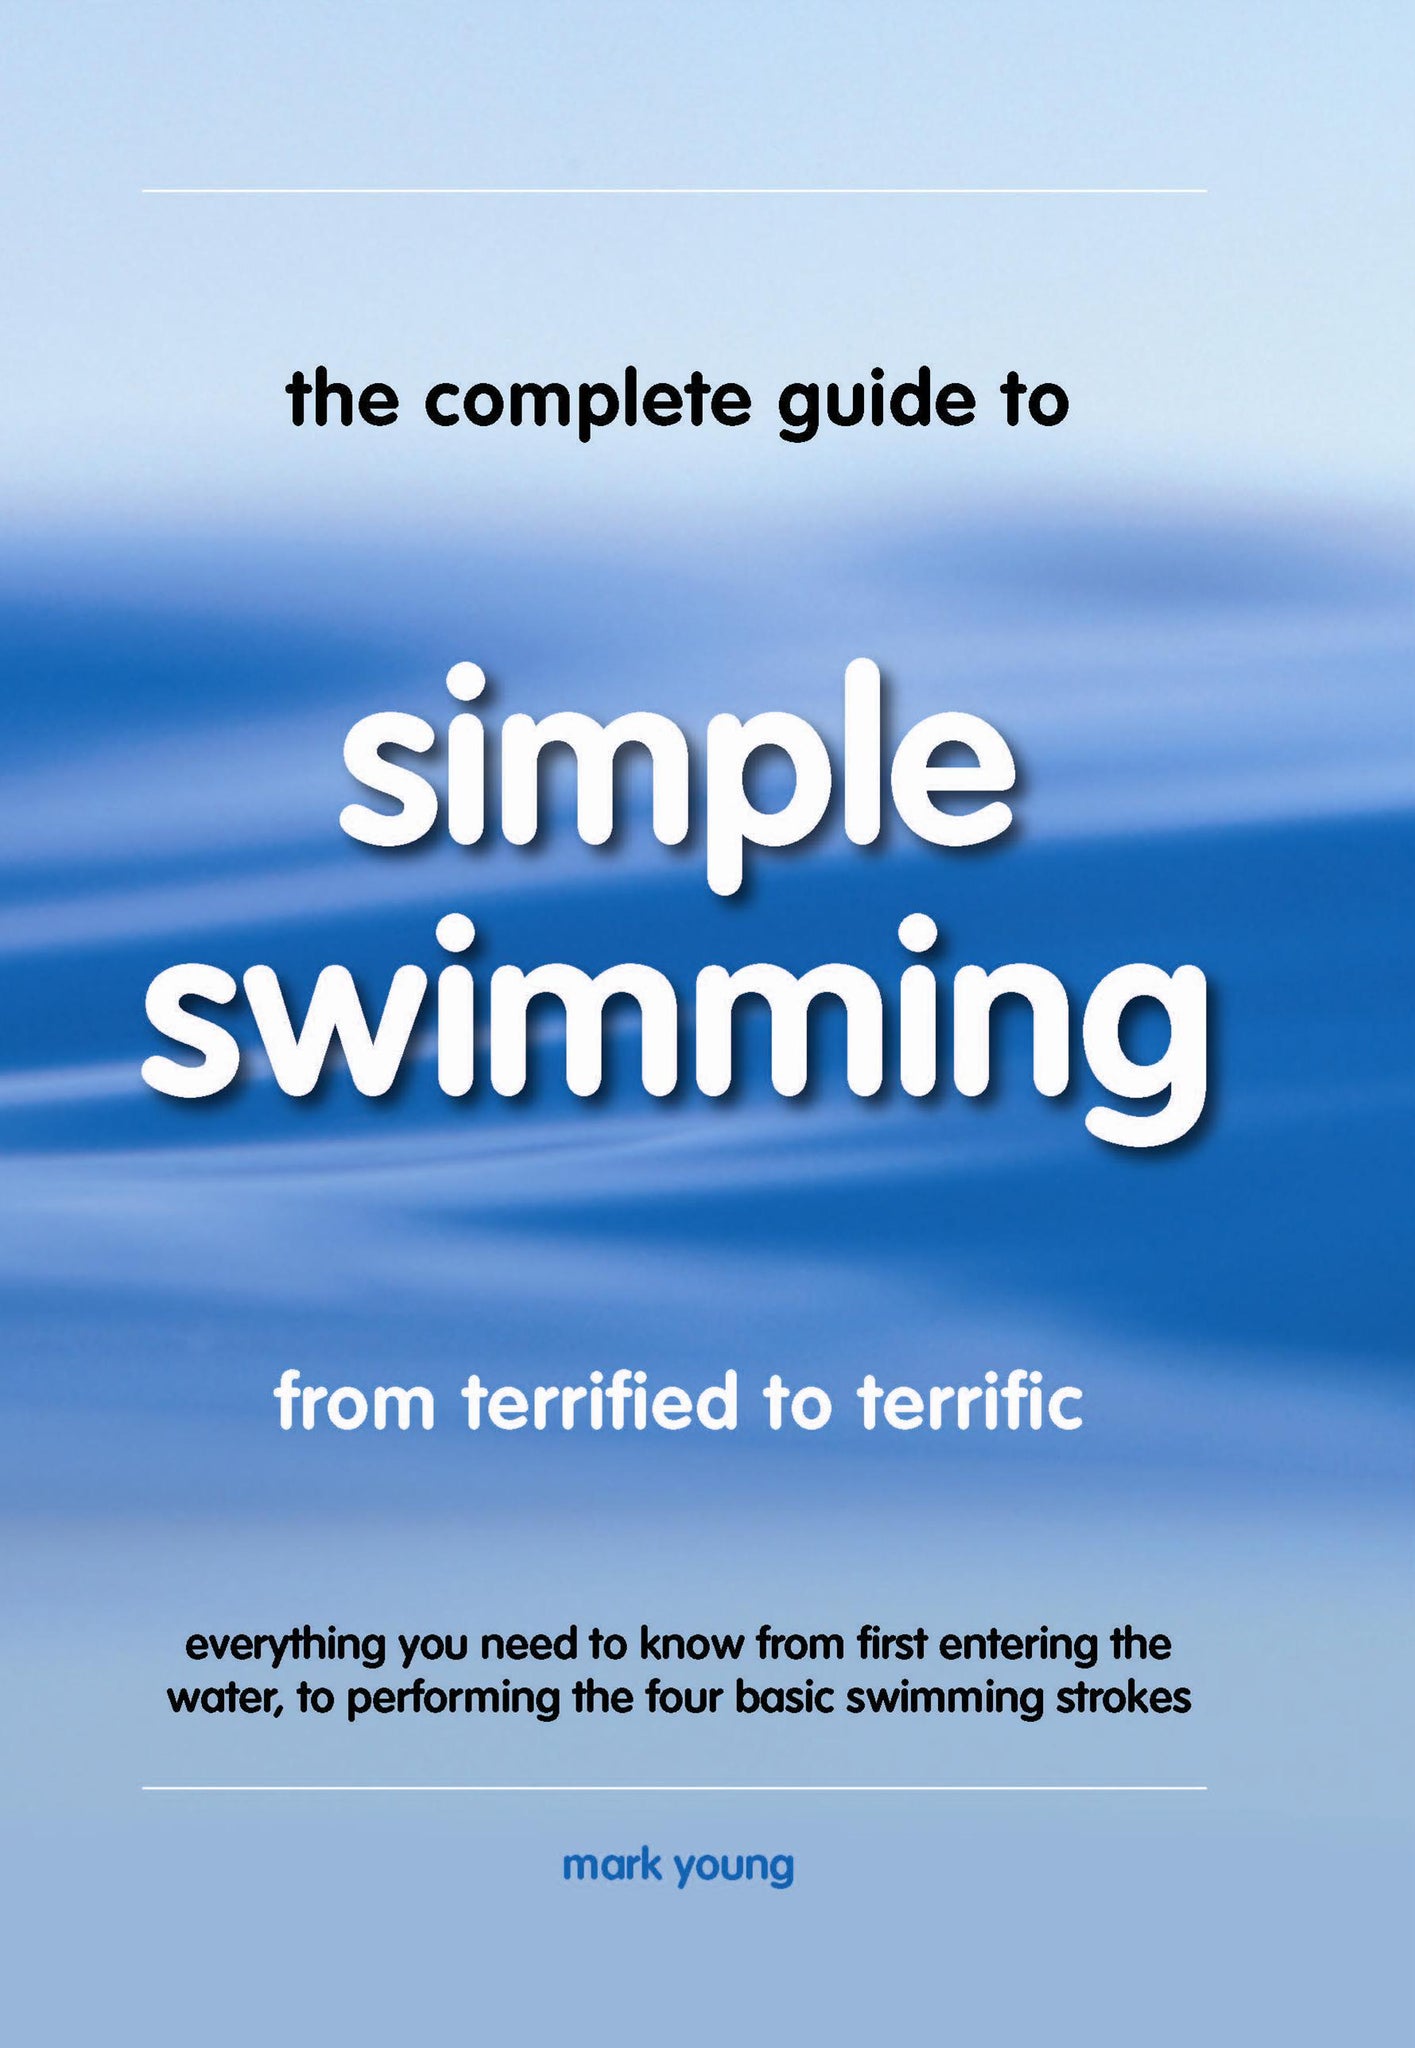 The Complete Guide To Simple Swimming